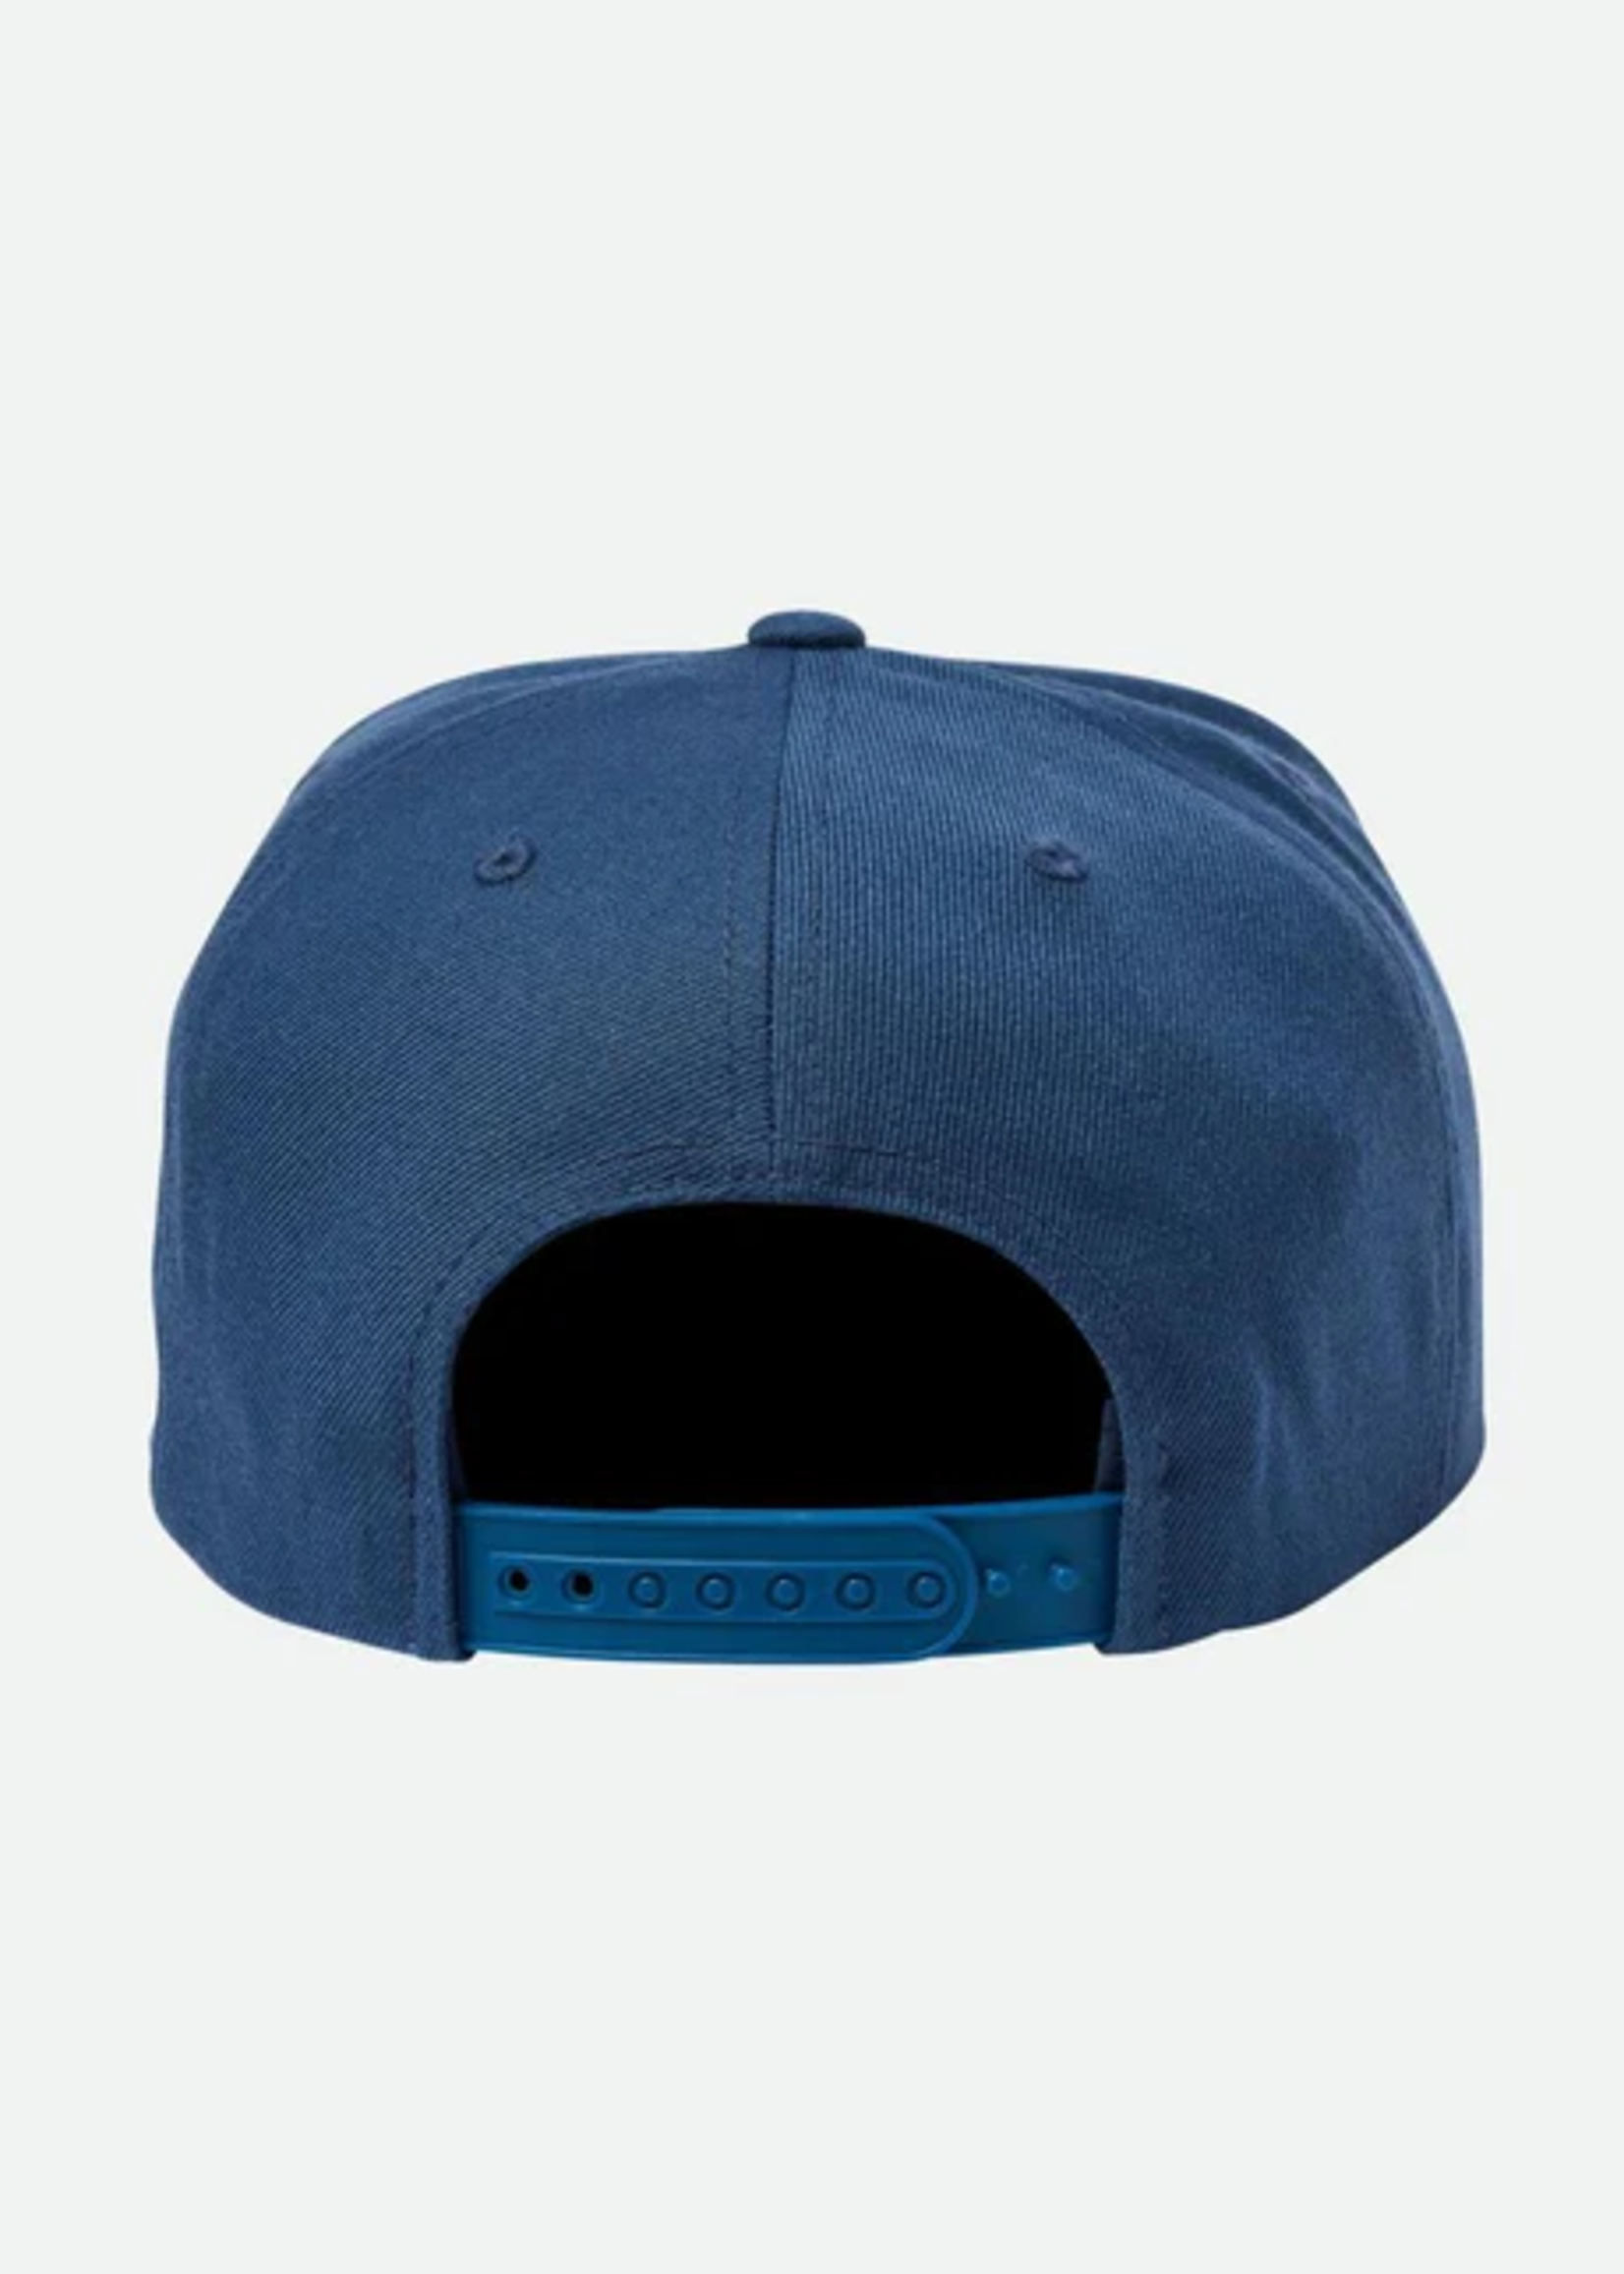 Brixton Oath Snapback - Washed Navy/Indie Teal